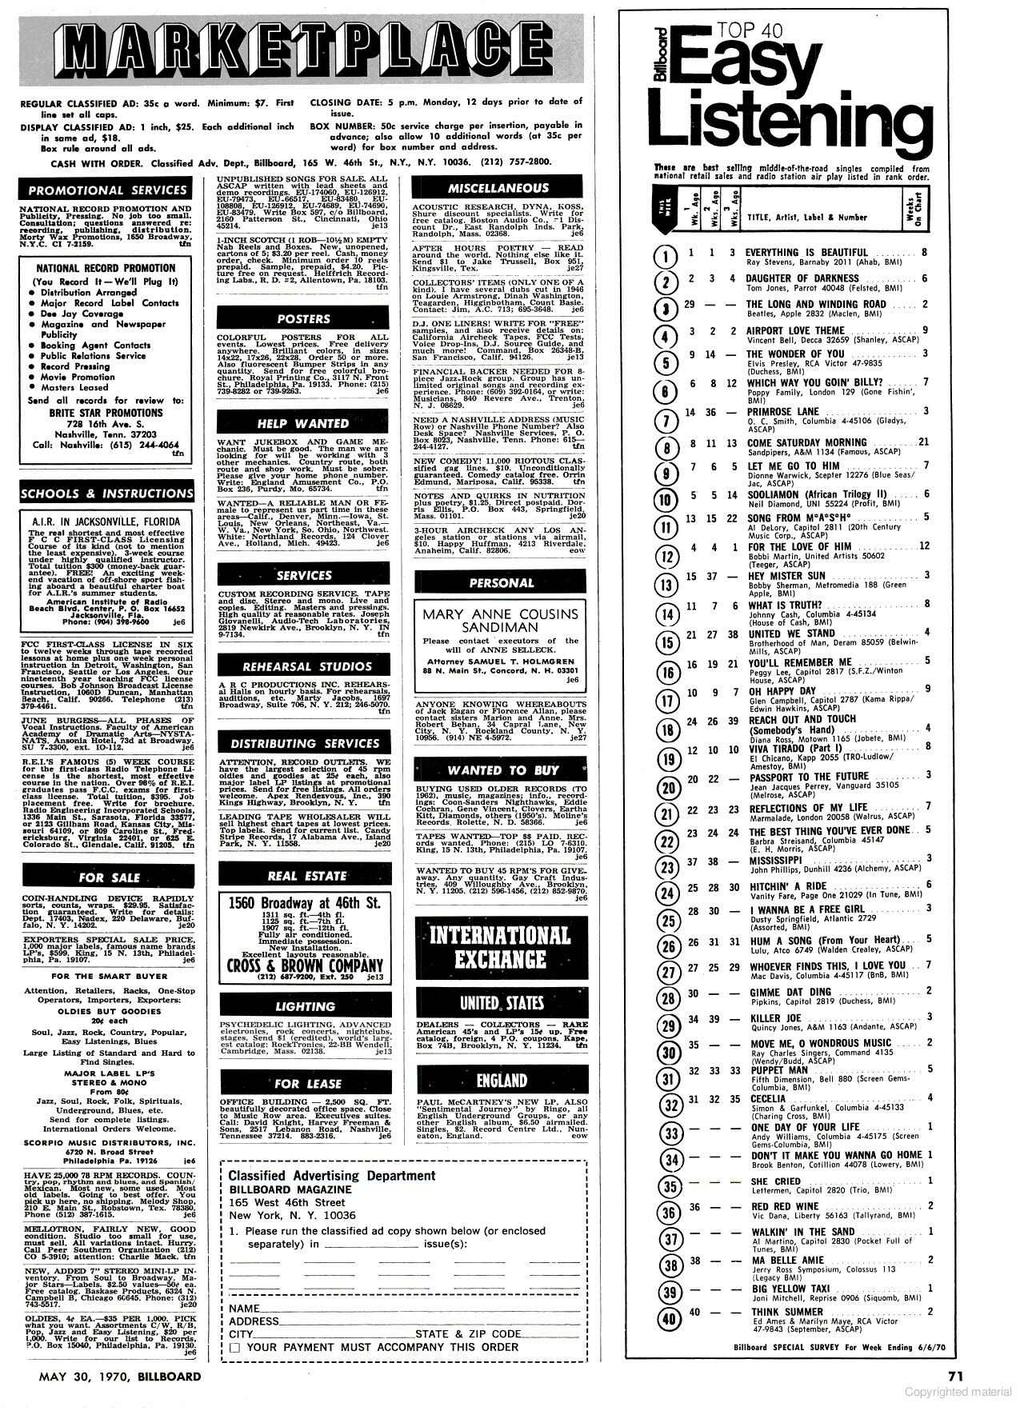 frin www.americanradiohistory.com REGULAR CLASSIFIED AD: 351 a ward line nt all cops. DISPLAY CLASSIFIED AD: 1 inch, $25. in earns, od. $18. Box ale ad all ads. CASH WITH ORDER.